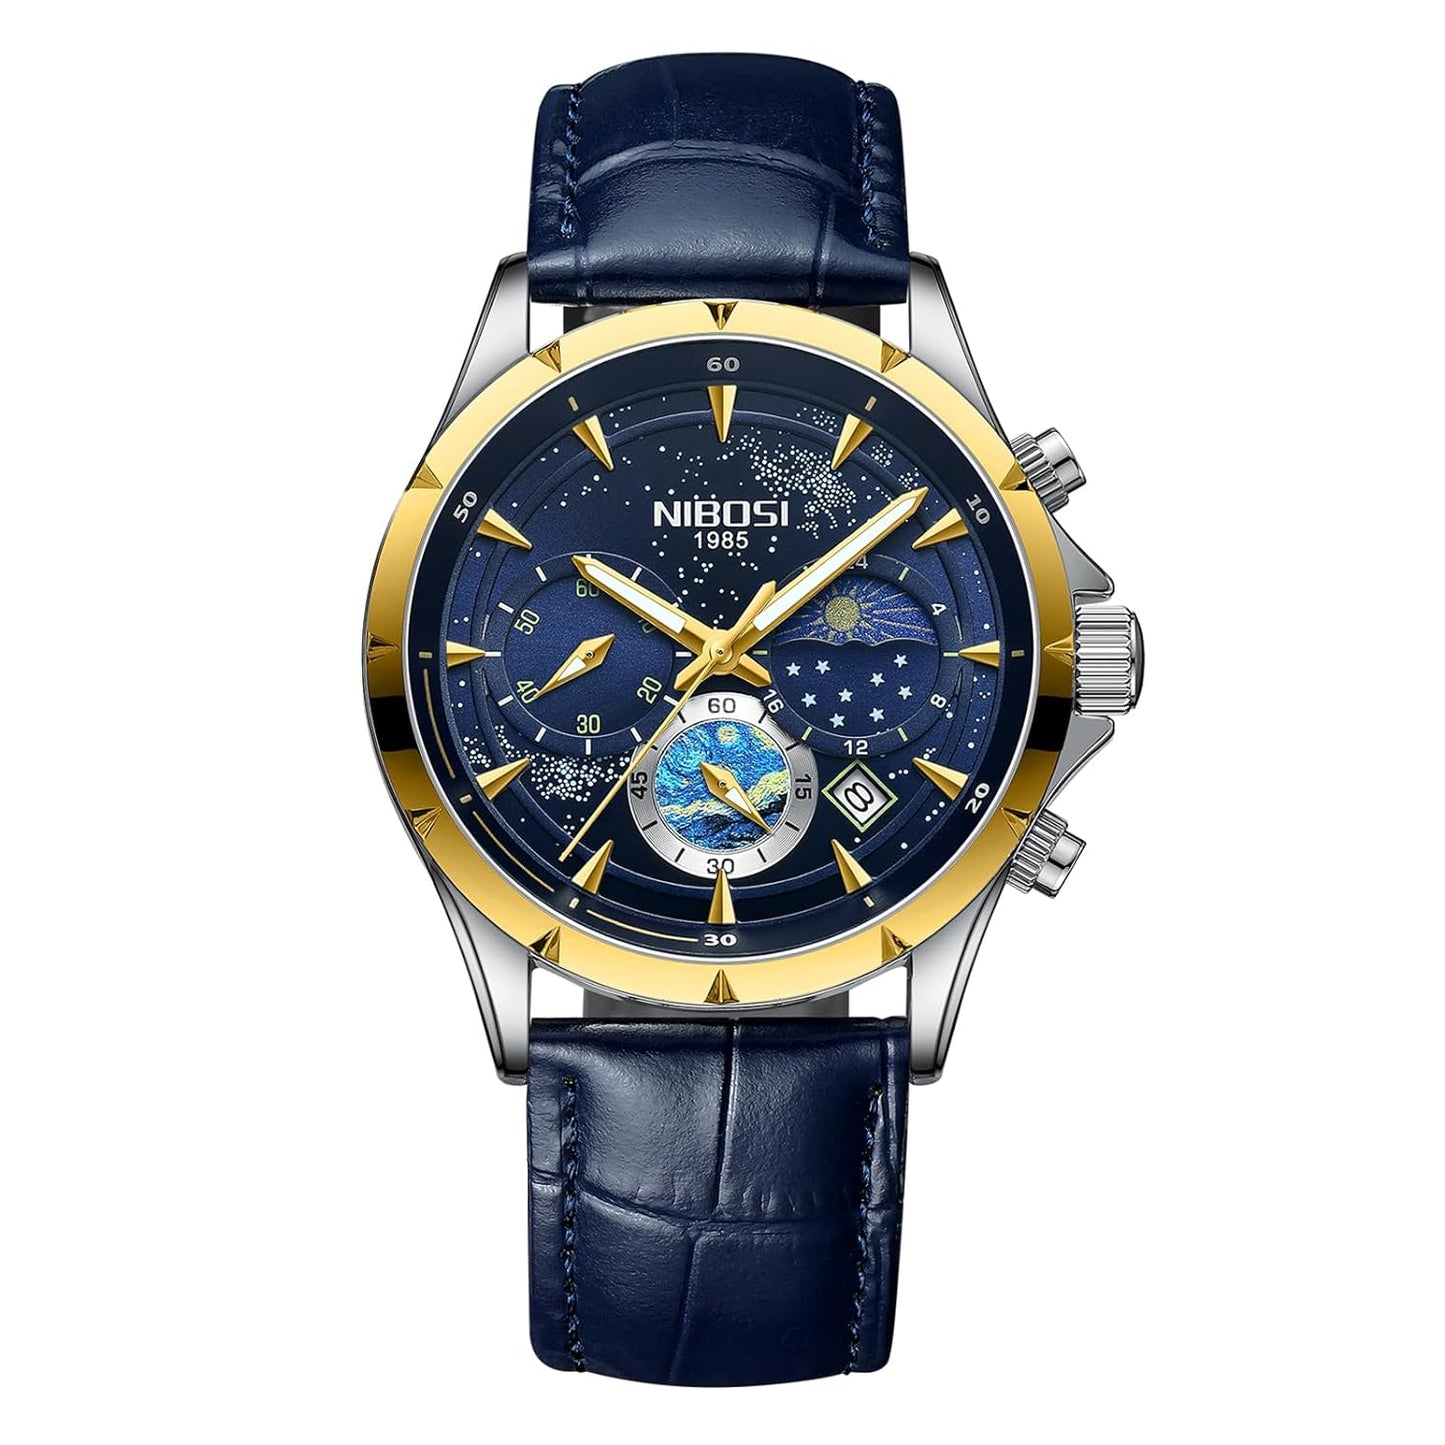 NIBOSI Men's Watches Analog Quartz Starry Dial Watches for Men Stylish Waterproof Chronograph Stainless Steel Leather Wrist Watches Calendar